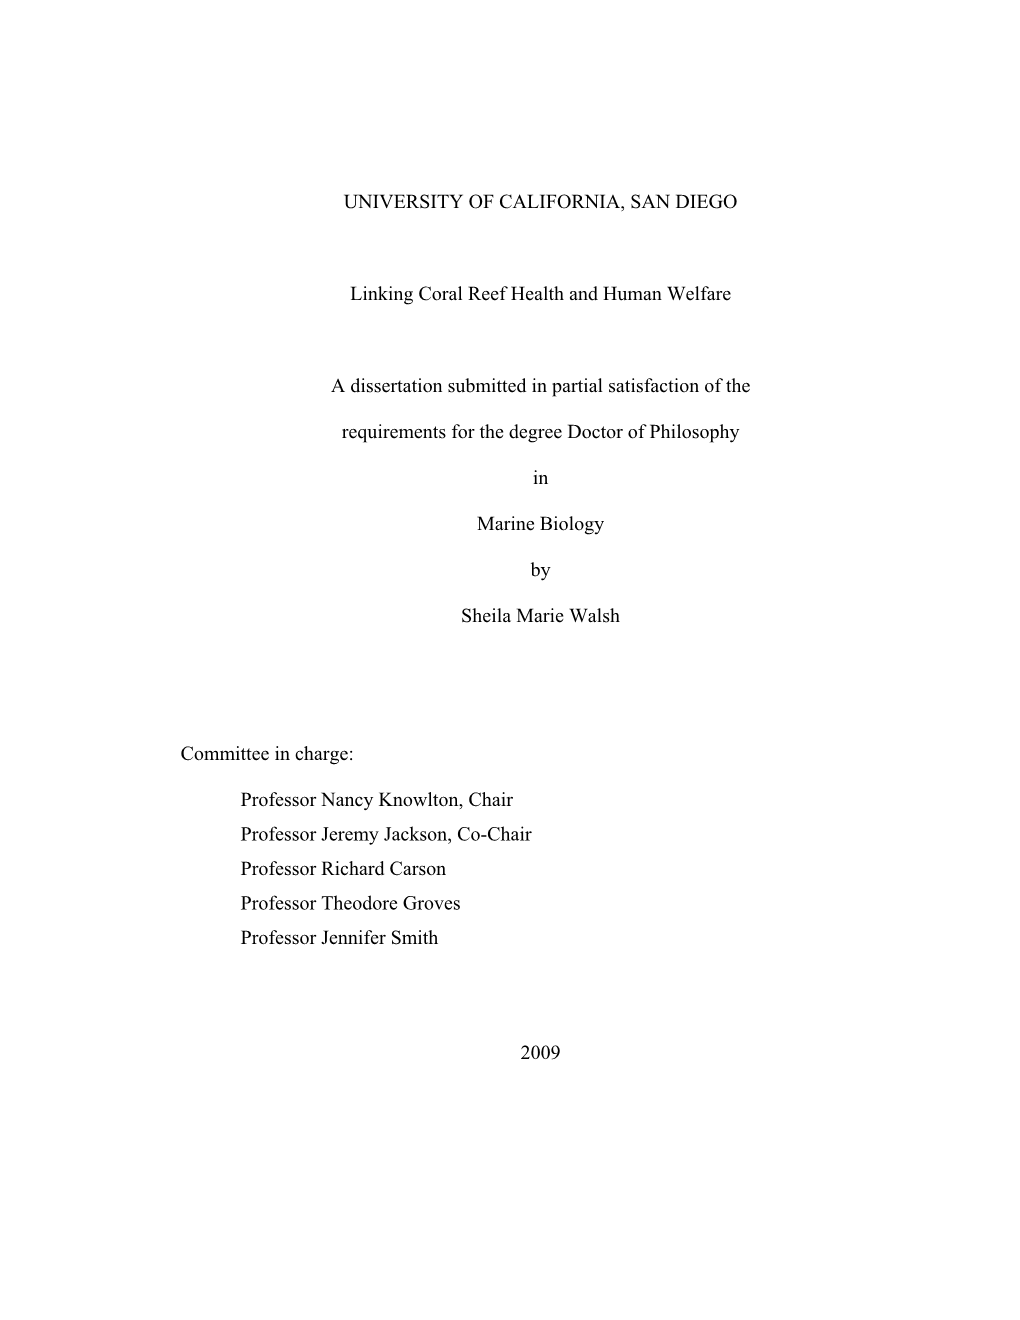 UNIVERSITY of CALIFORNIA, SAN DIEGO Linking Coral Reef Health and Human Welfare a Dissertation Submitted in Partial Satisfaction